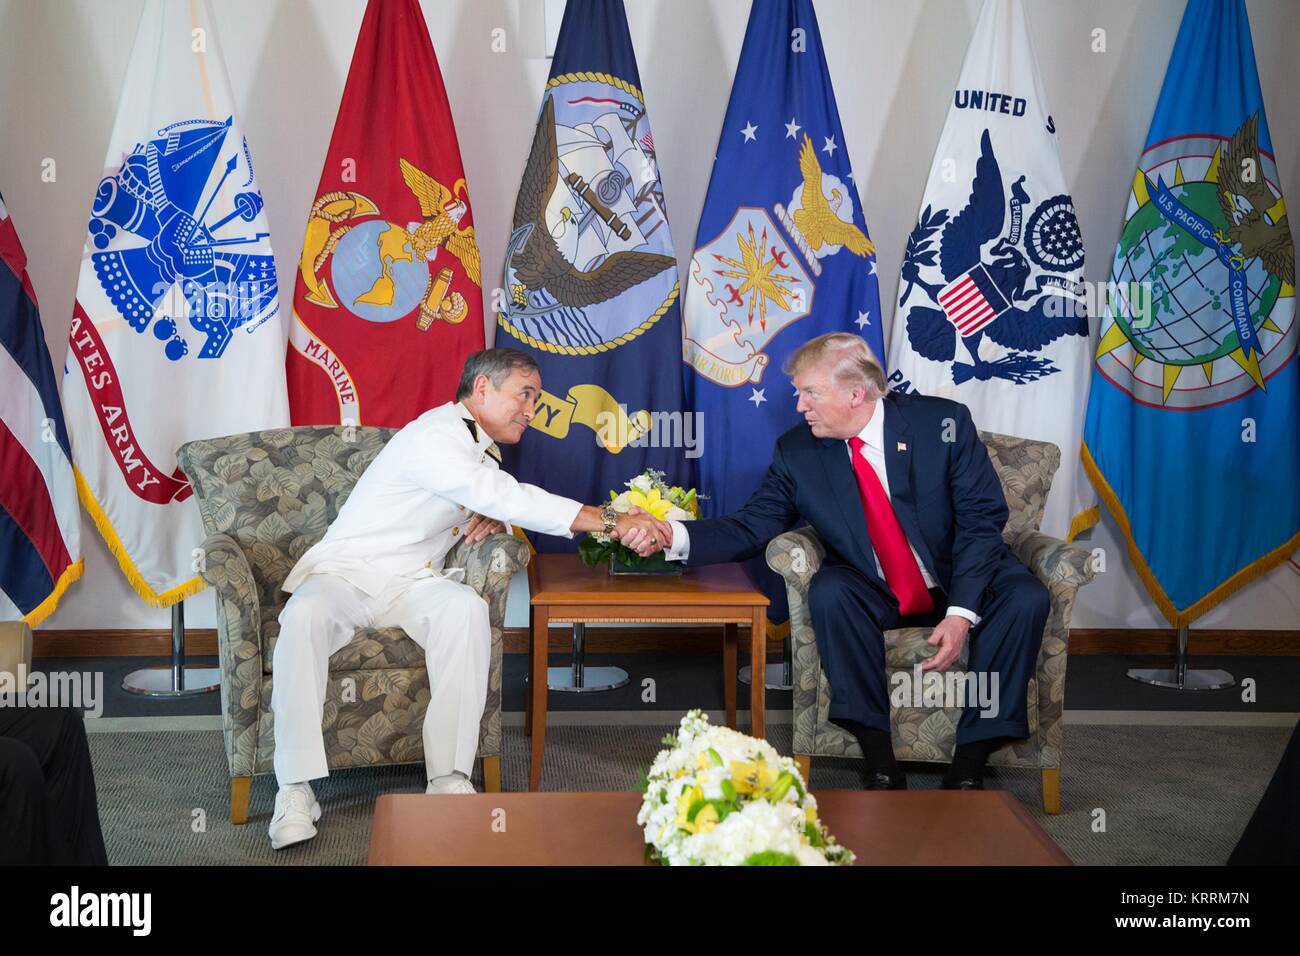 U.S. Pacific Command (PACOM) Commander Harry Harris (left) greets U.S. President Donald Trump upon his arrival at the U.S. Pacific Command Headquarters November 3, 2017 in Aiea, Hawaii. Stock Photo